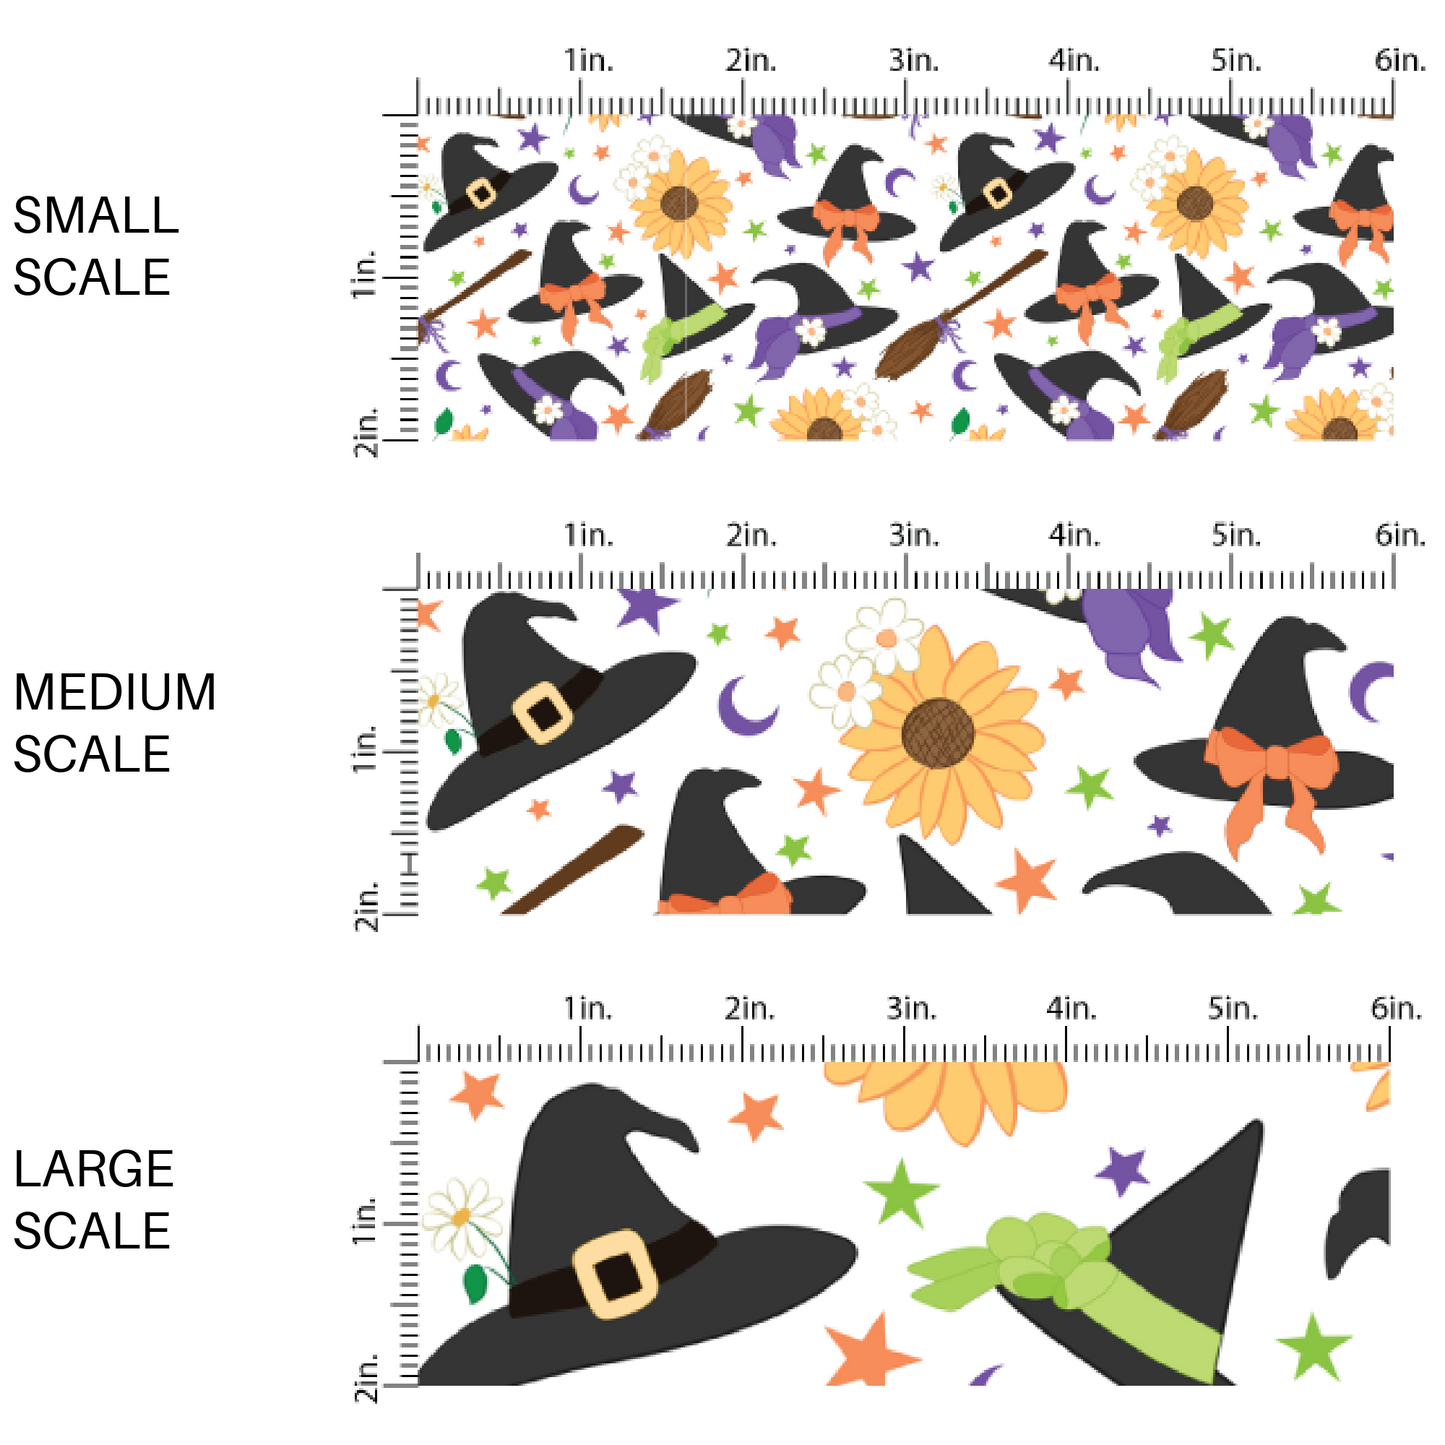 This scale chart of small scale, medium scale, and large scale of these Halloween themed cream fabric by the yard features witches, hats, brooms, sunflowers, small daisies, and small colorful stars on cream. This fun spooky themed fabric can be used for all your sewing and crafting needs! 